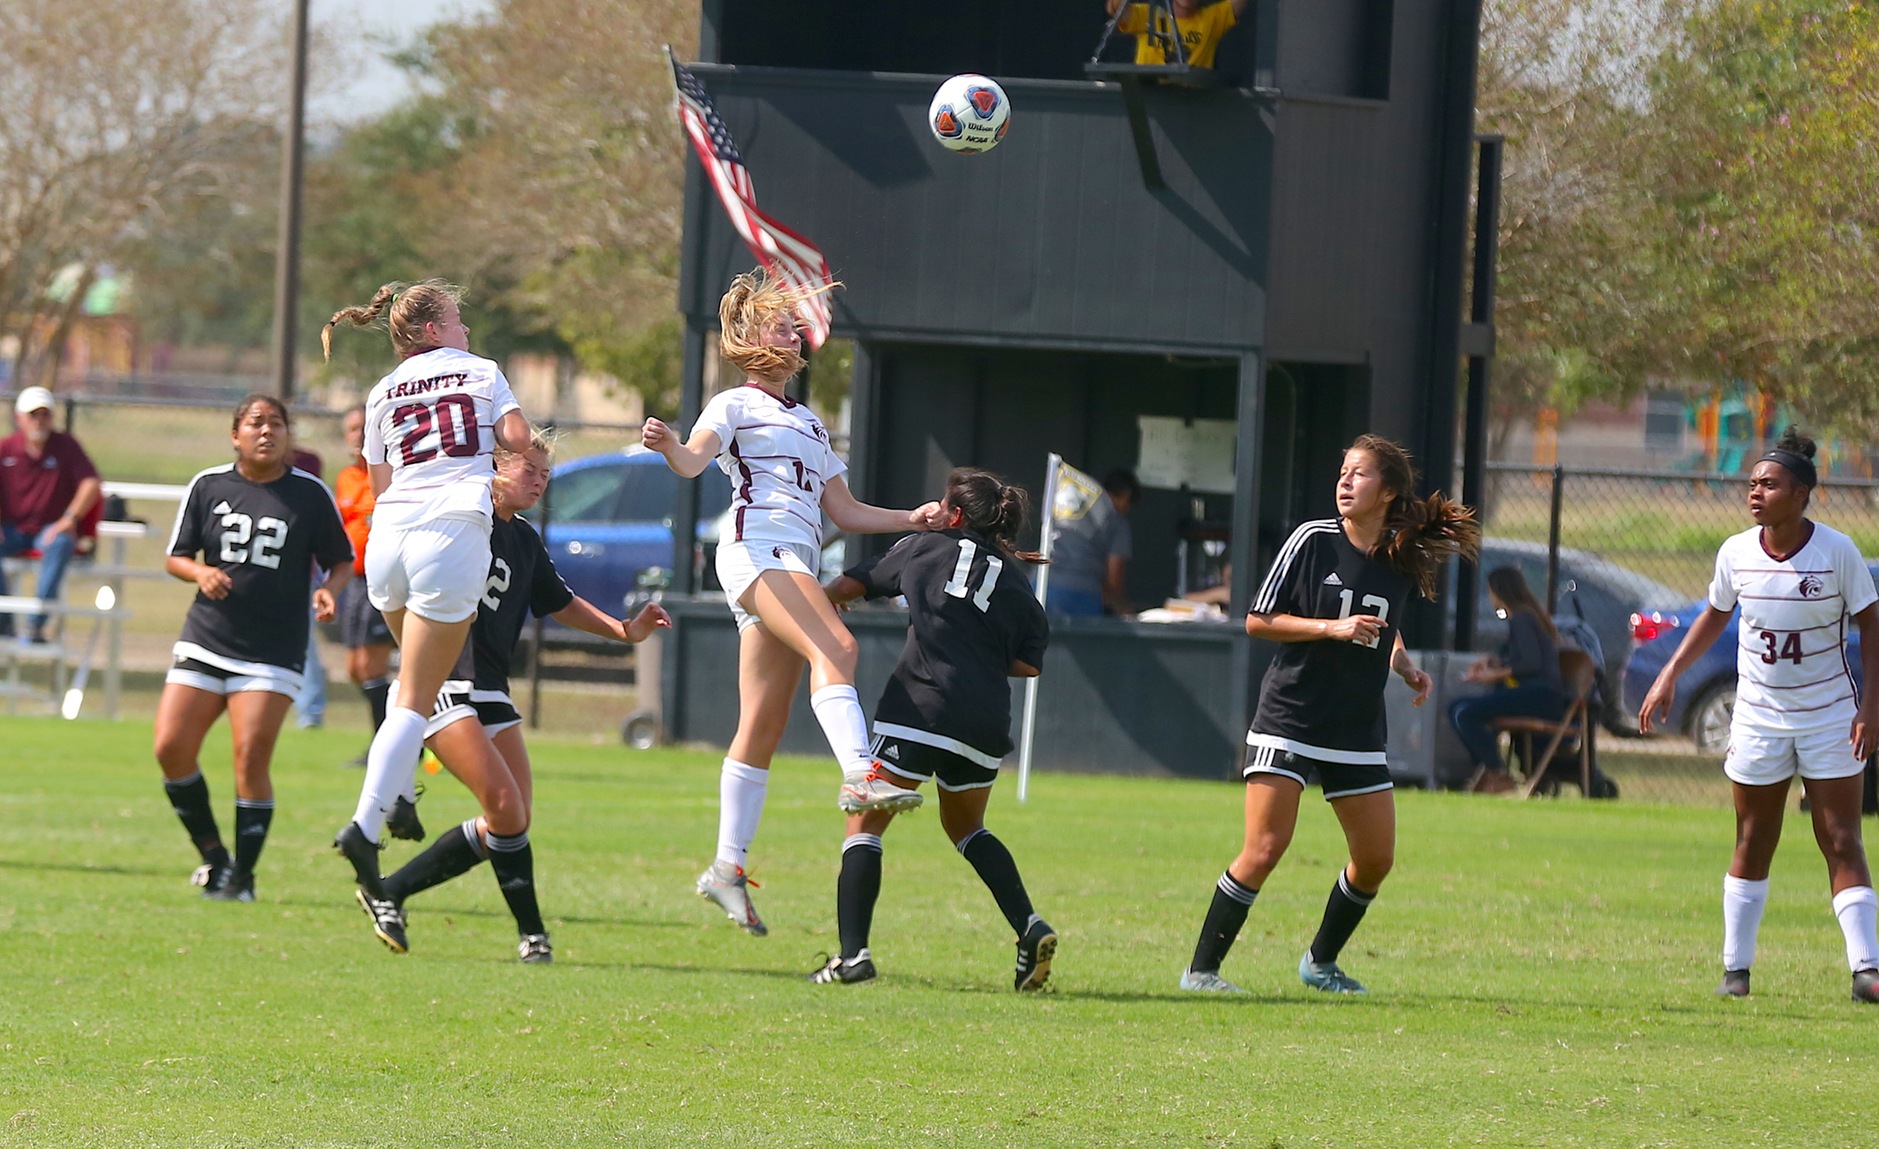 Trinity remains unbeaten in SCAC play after 5-0 win over Texas Lutheran